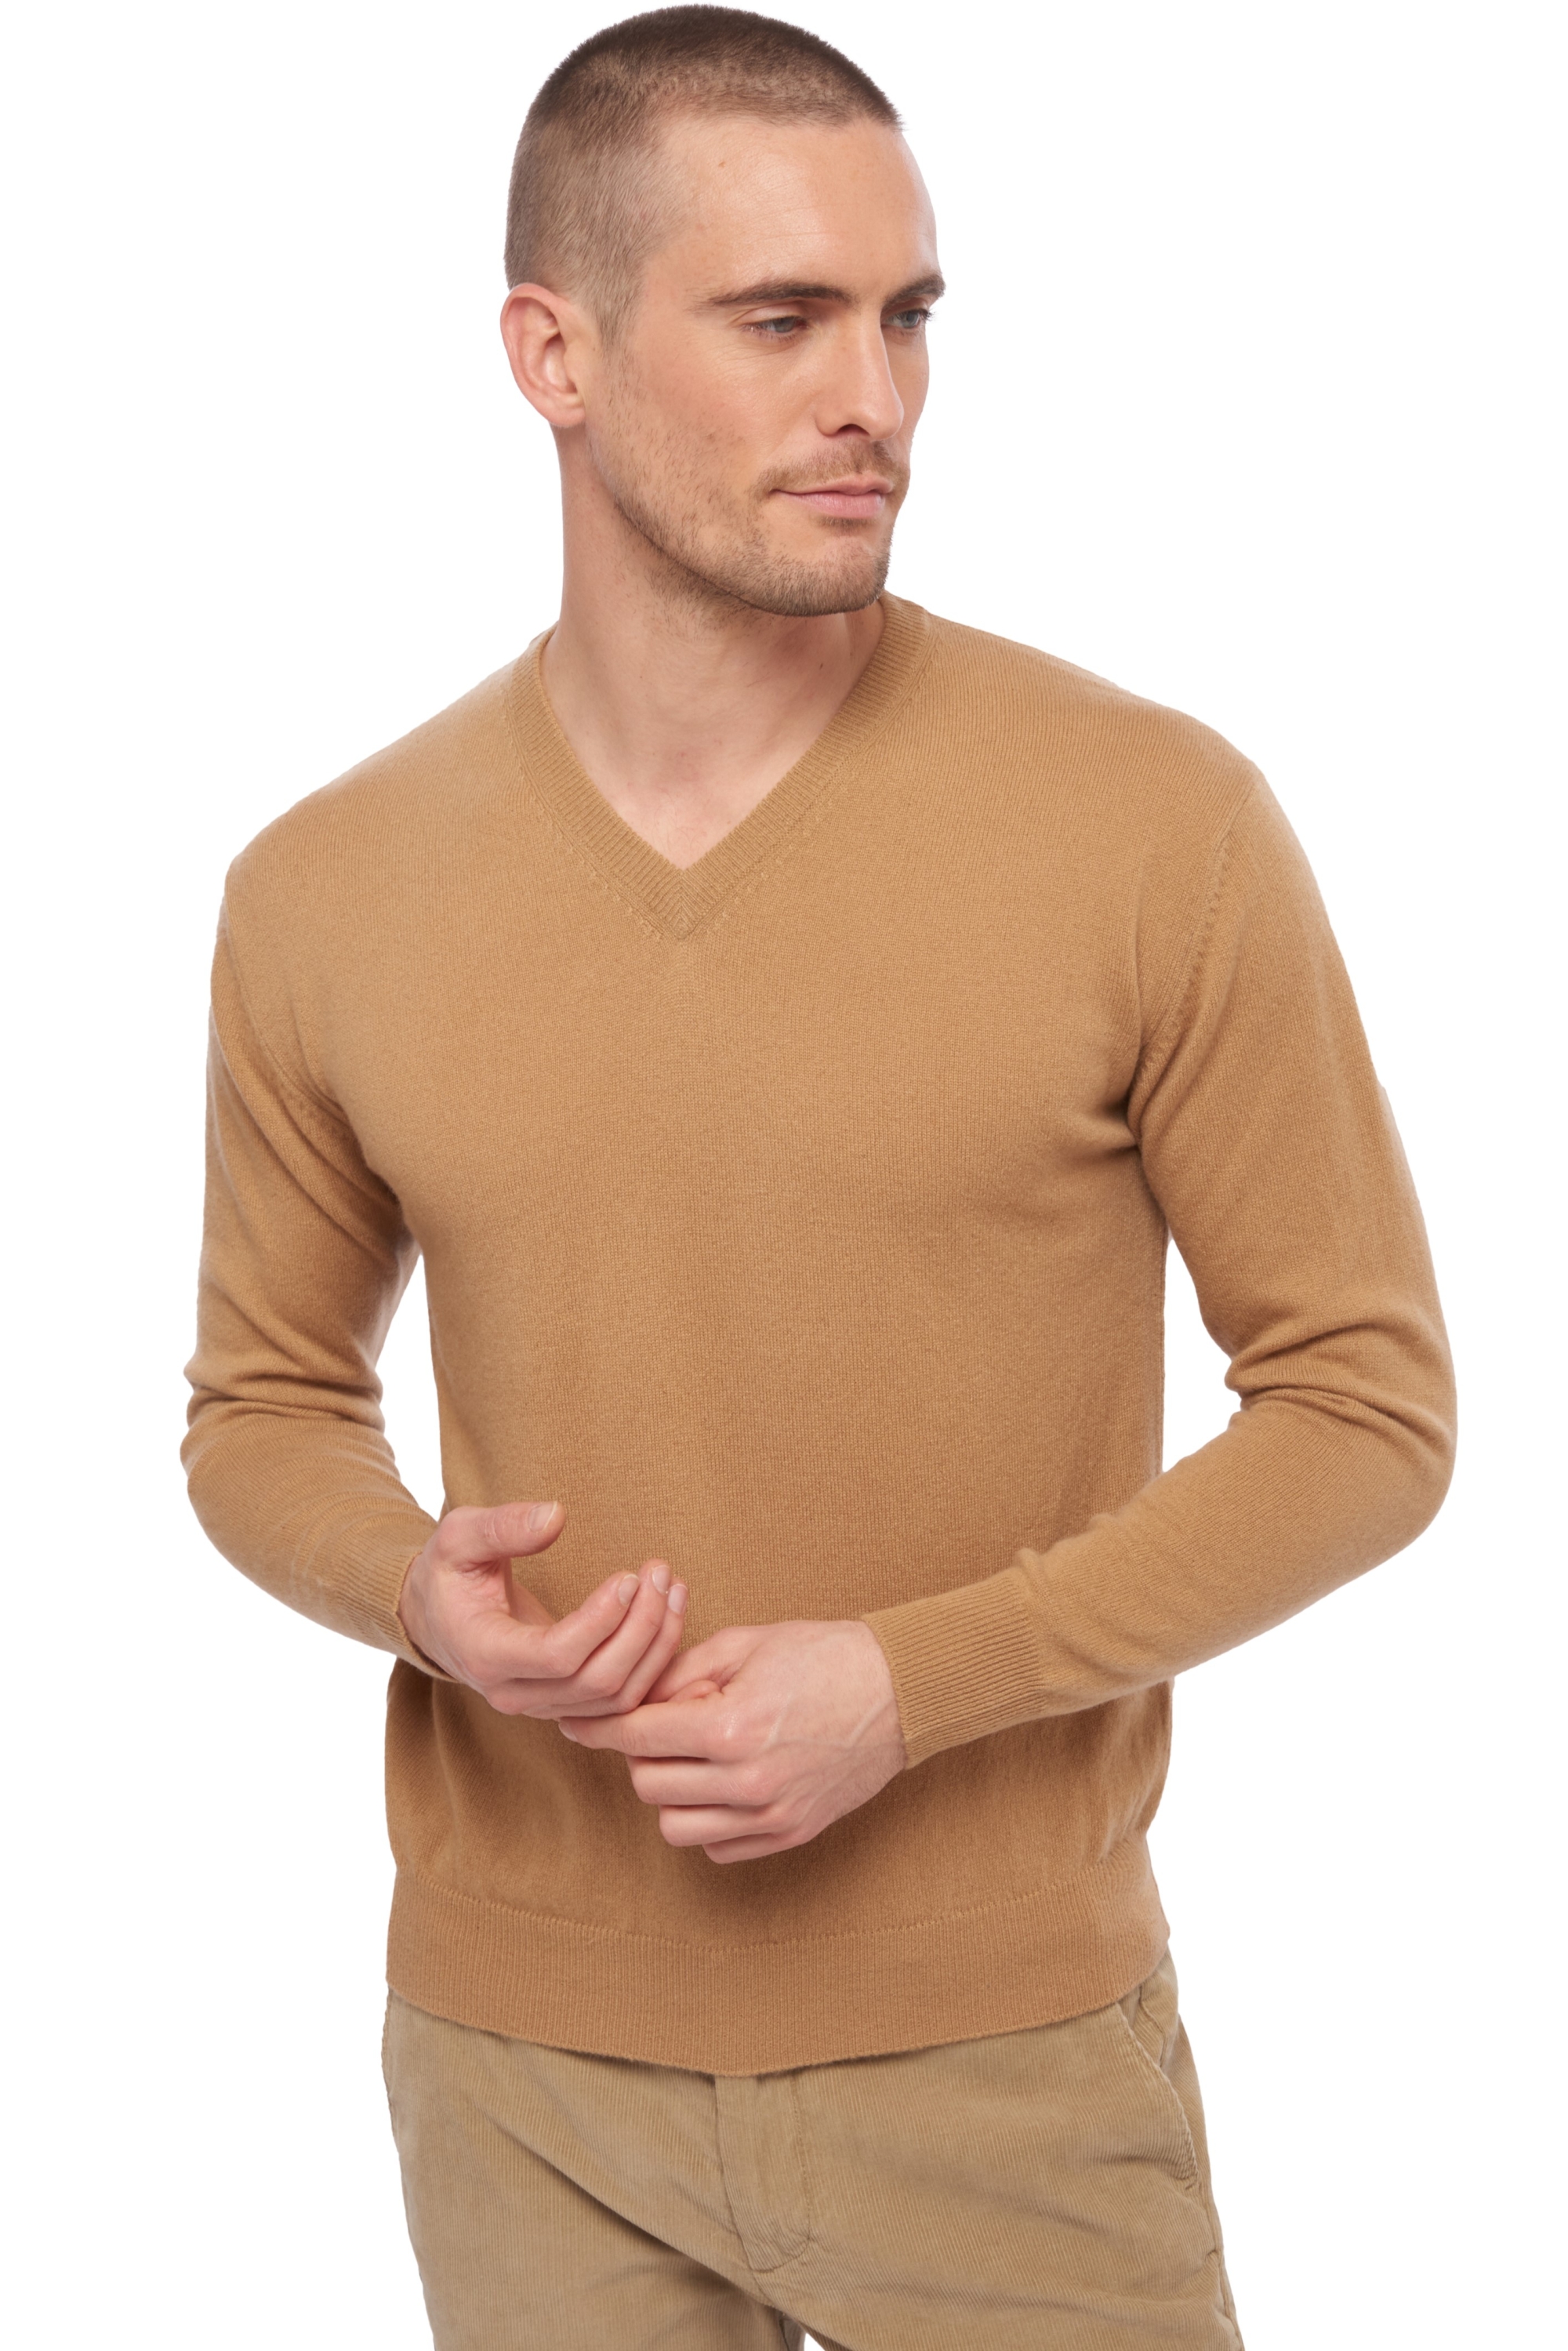 Cachemire pull homme hippolyte camel 2xl